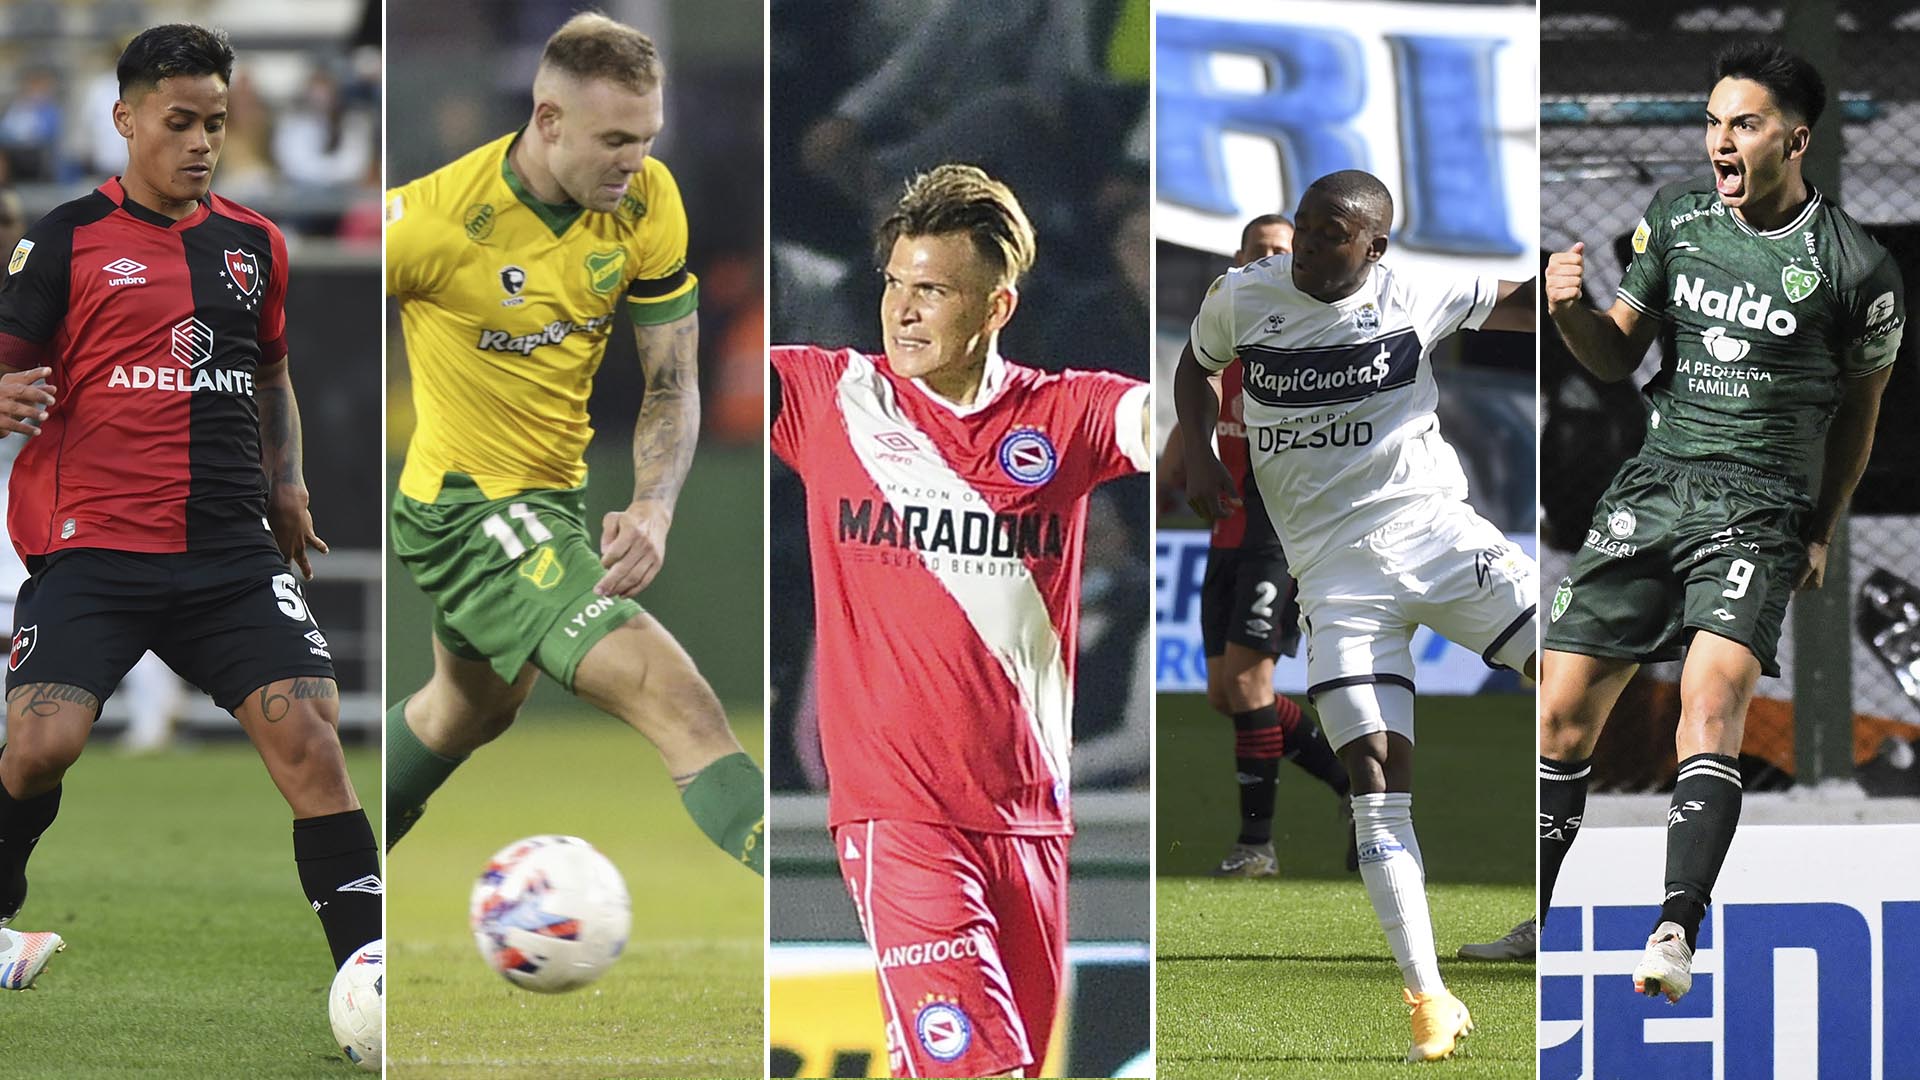 Newell's, Defensa y Justicia, Argentinos, Gimnasia and Sarmiento fight to get to the quarterfinals